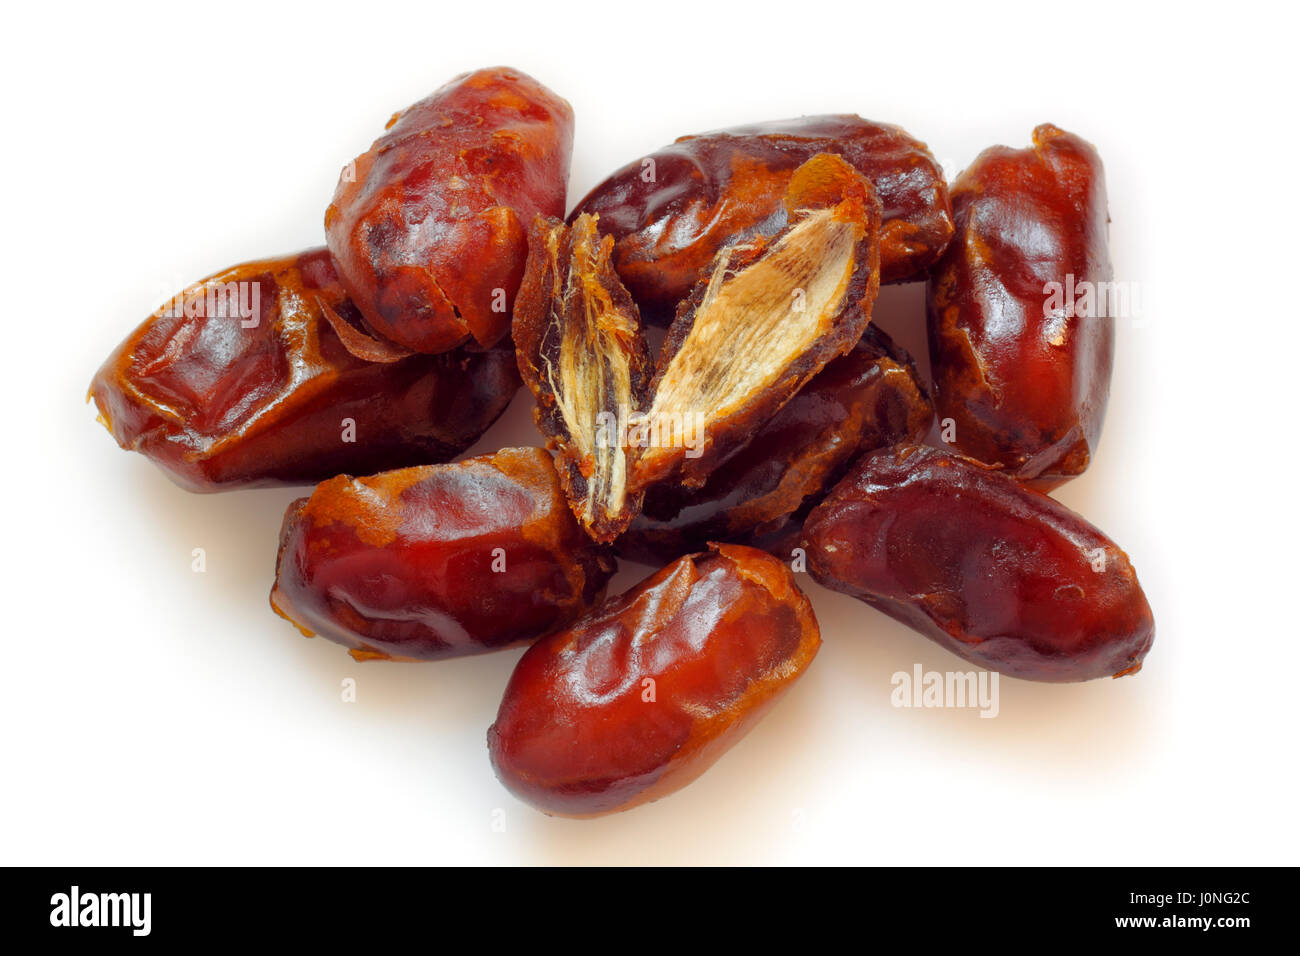 A pile of pitted dried dates on white background Stock Photo